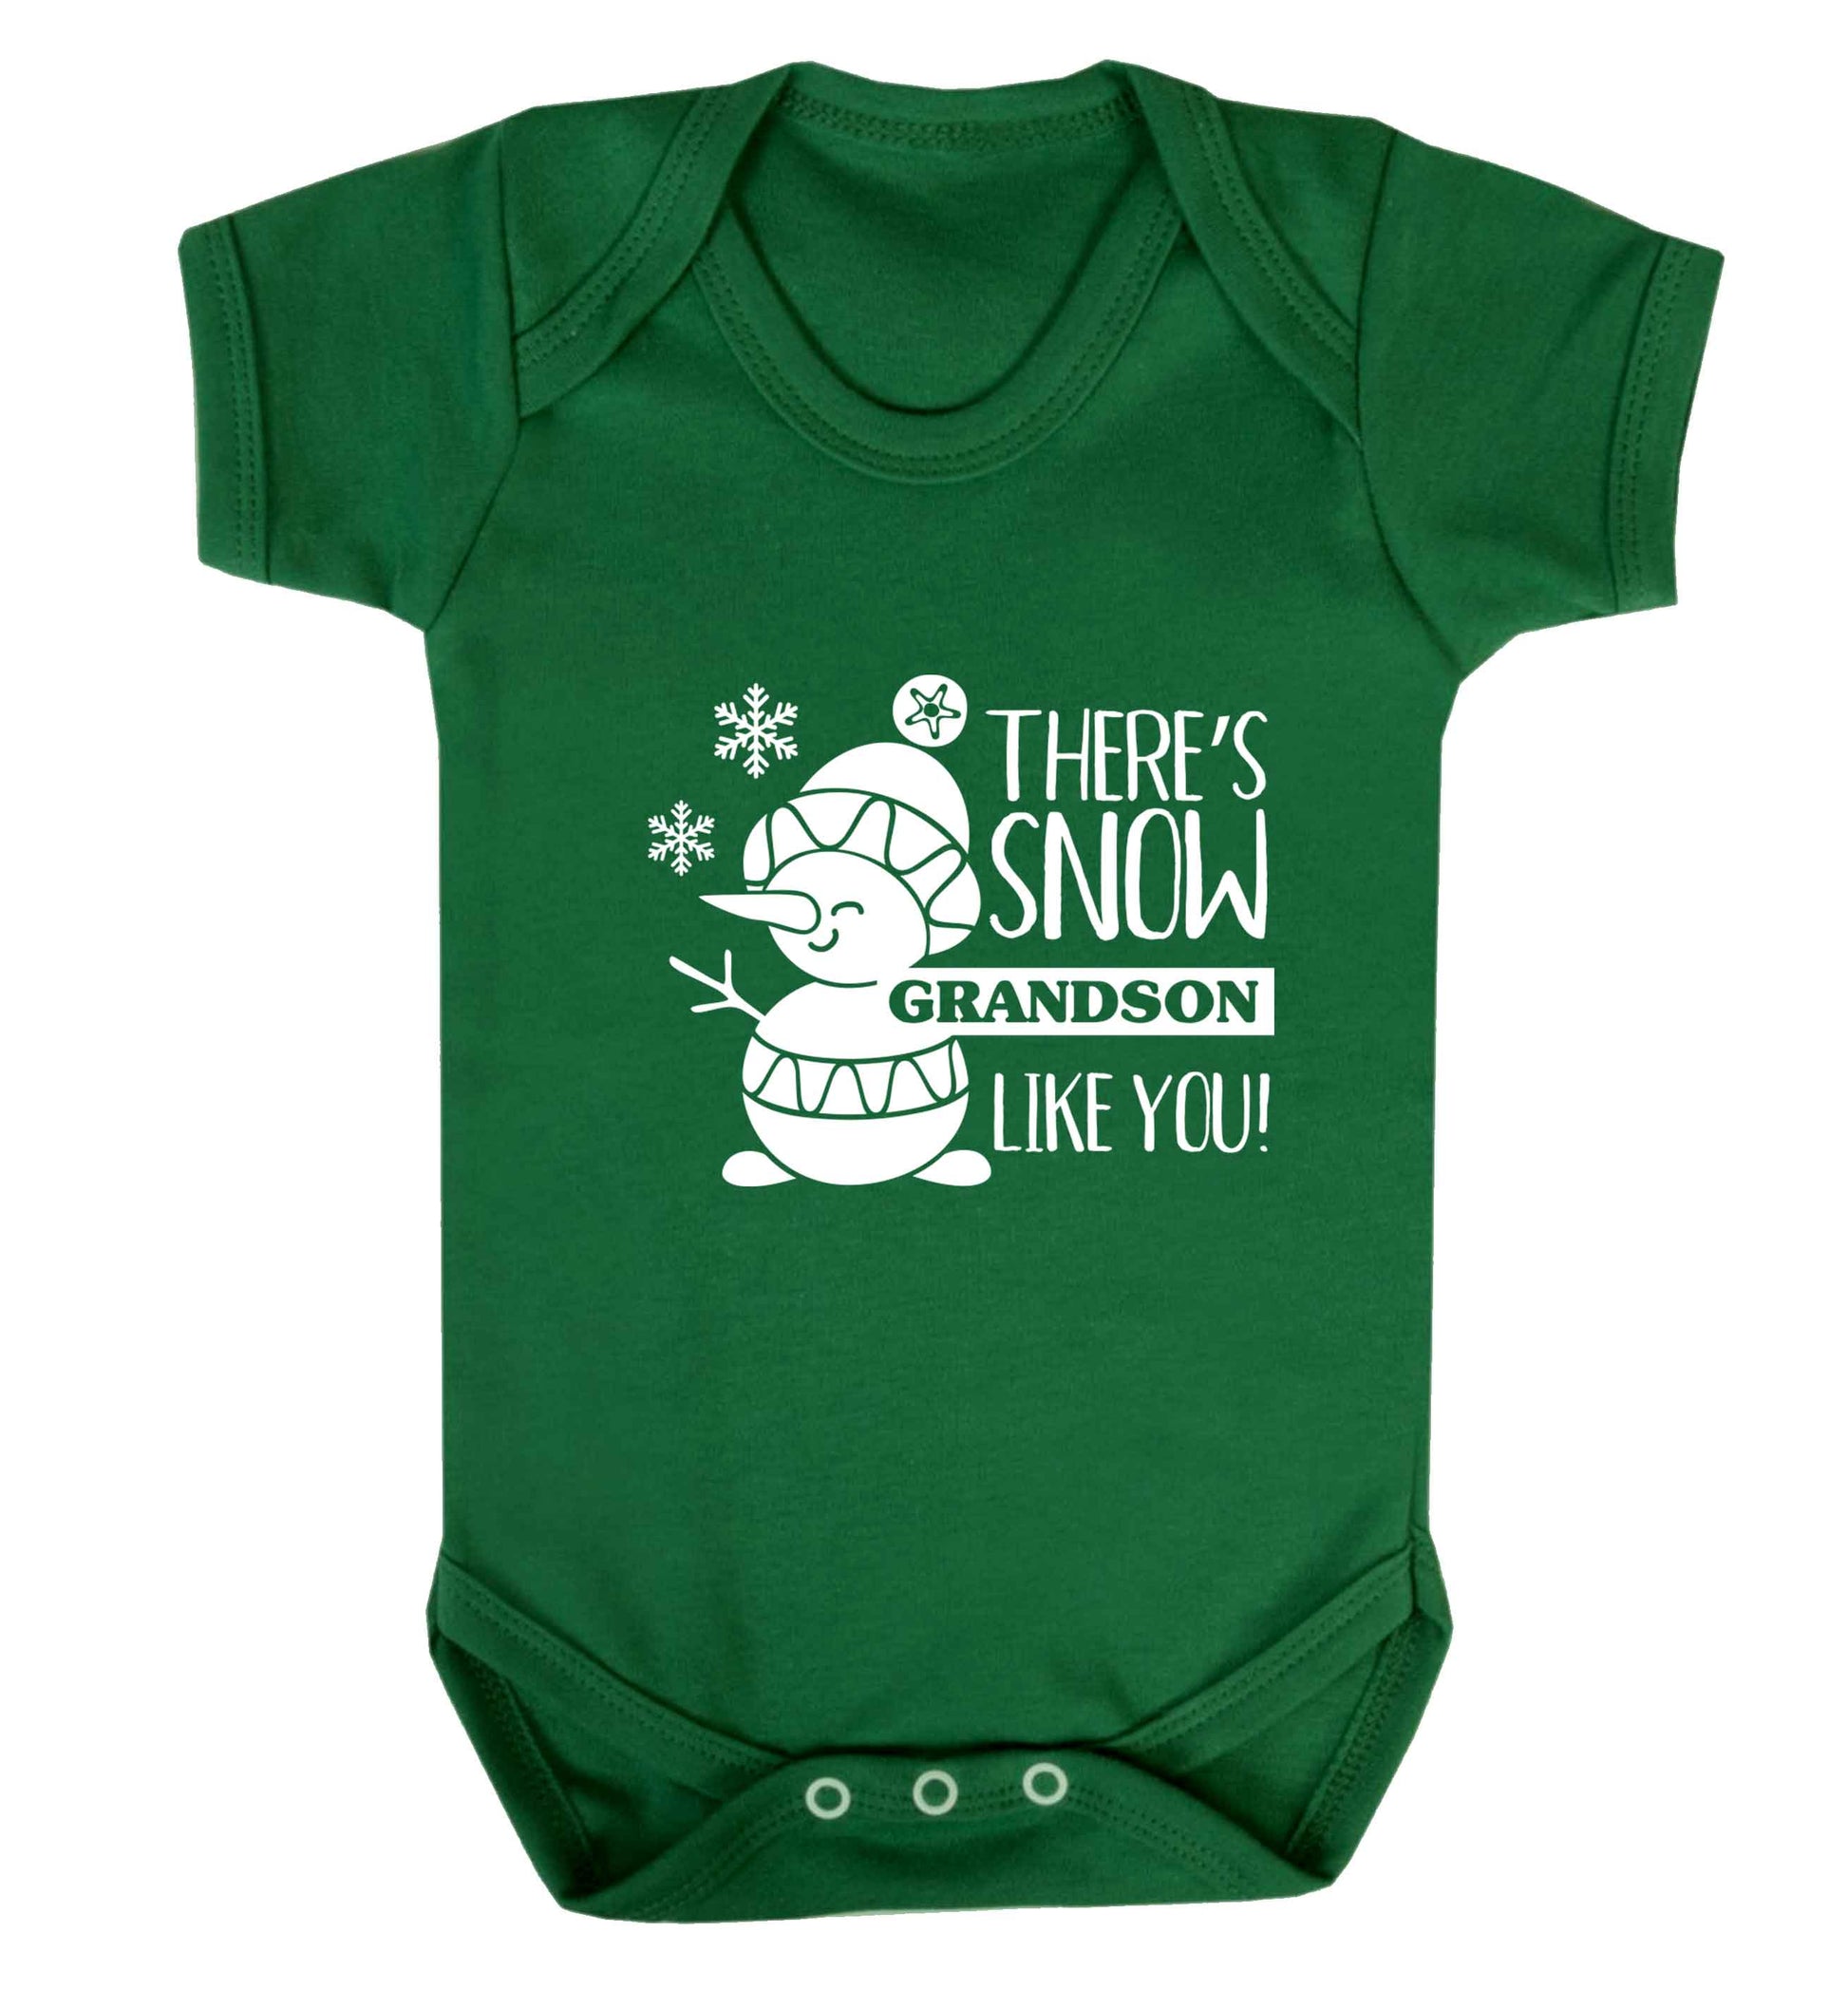 There's snow grandson like you baby vest green 18-24 months